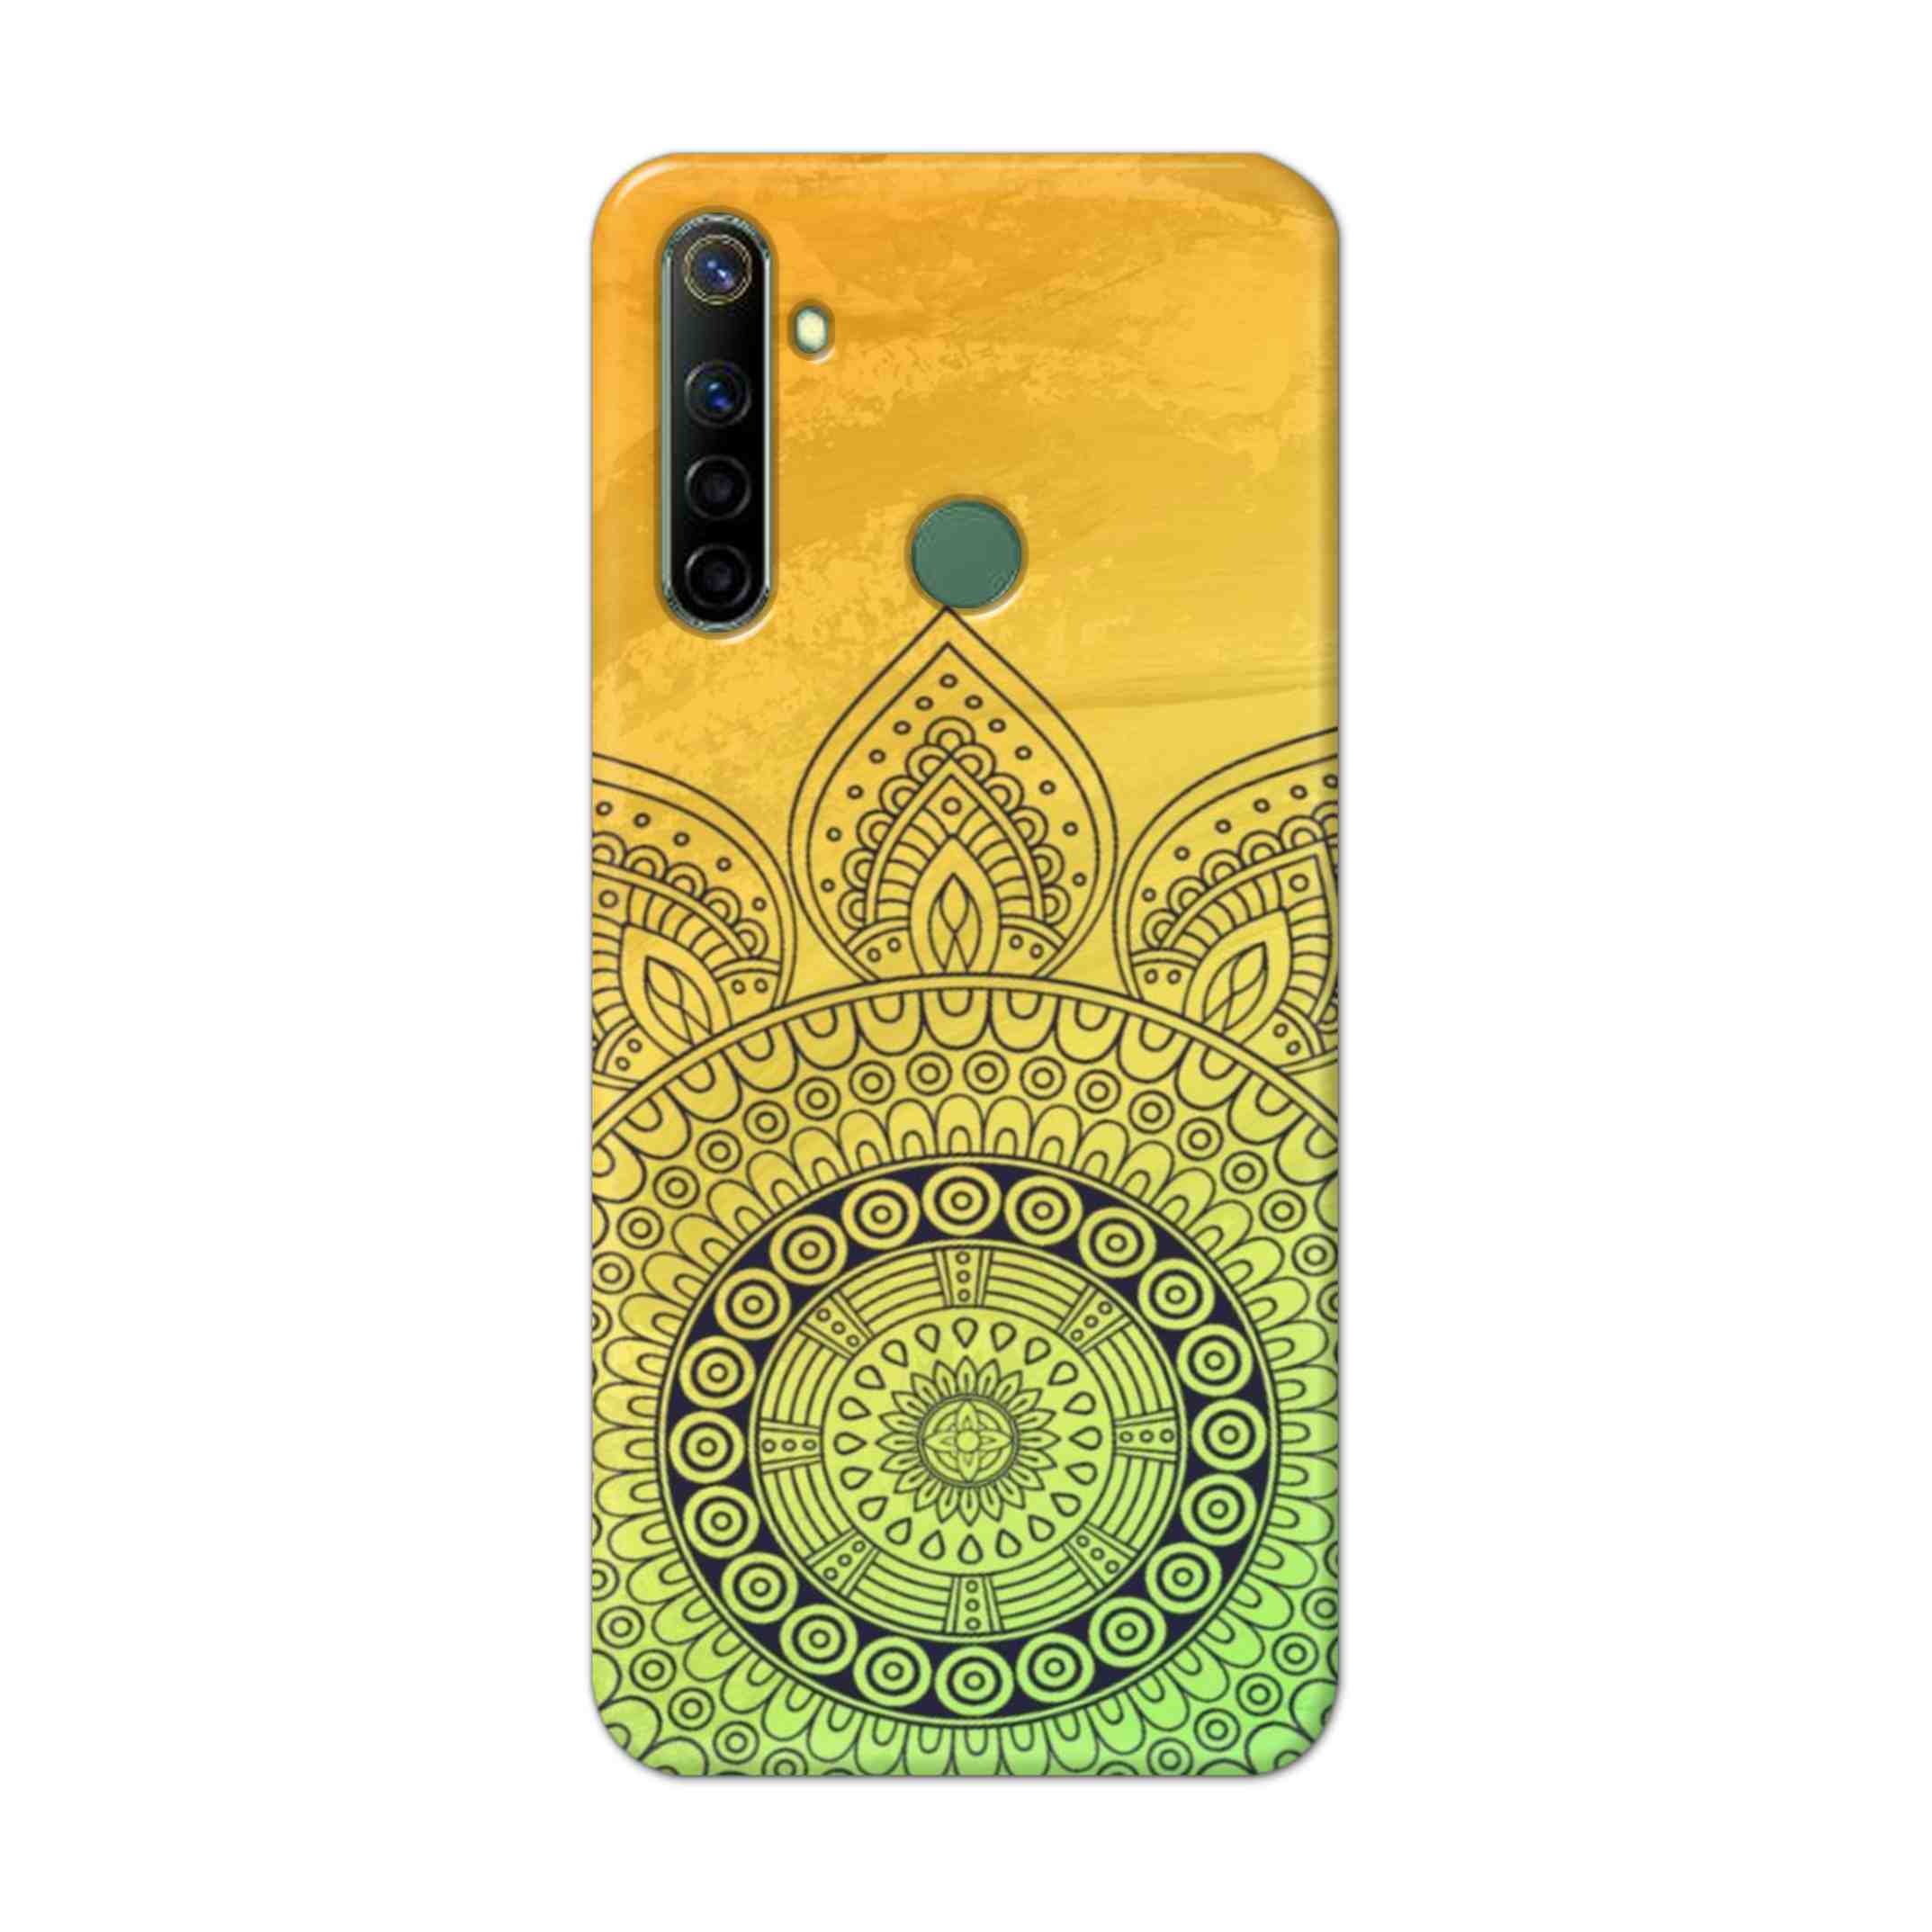 Buy Yellow Rangoli Hard Back Mobile Phone Case Cover For Realme Narzo 10a Online